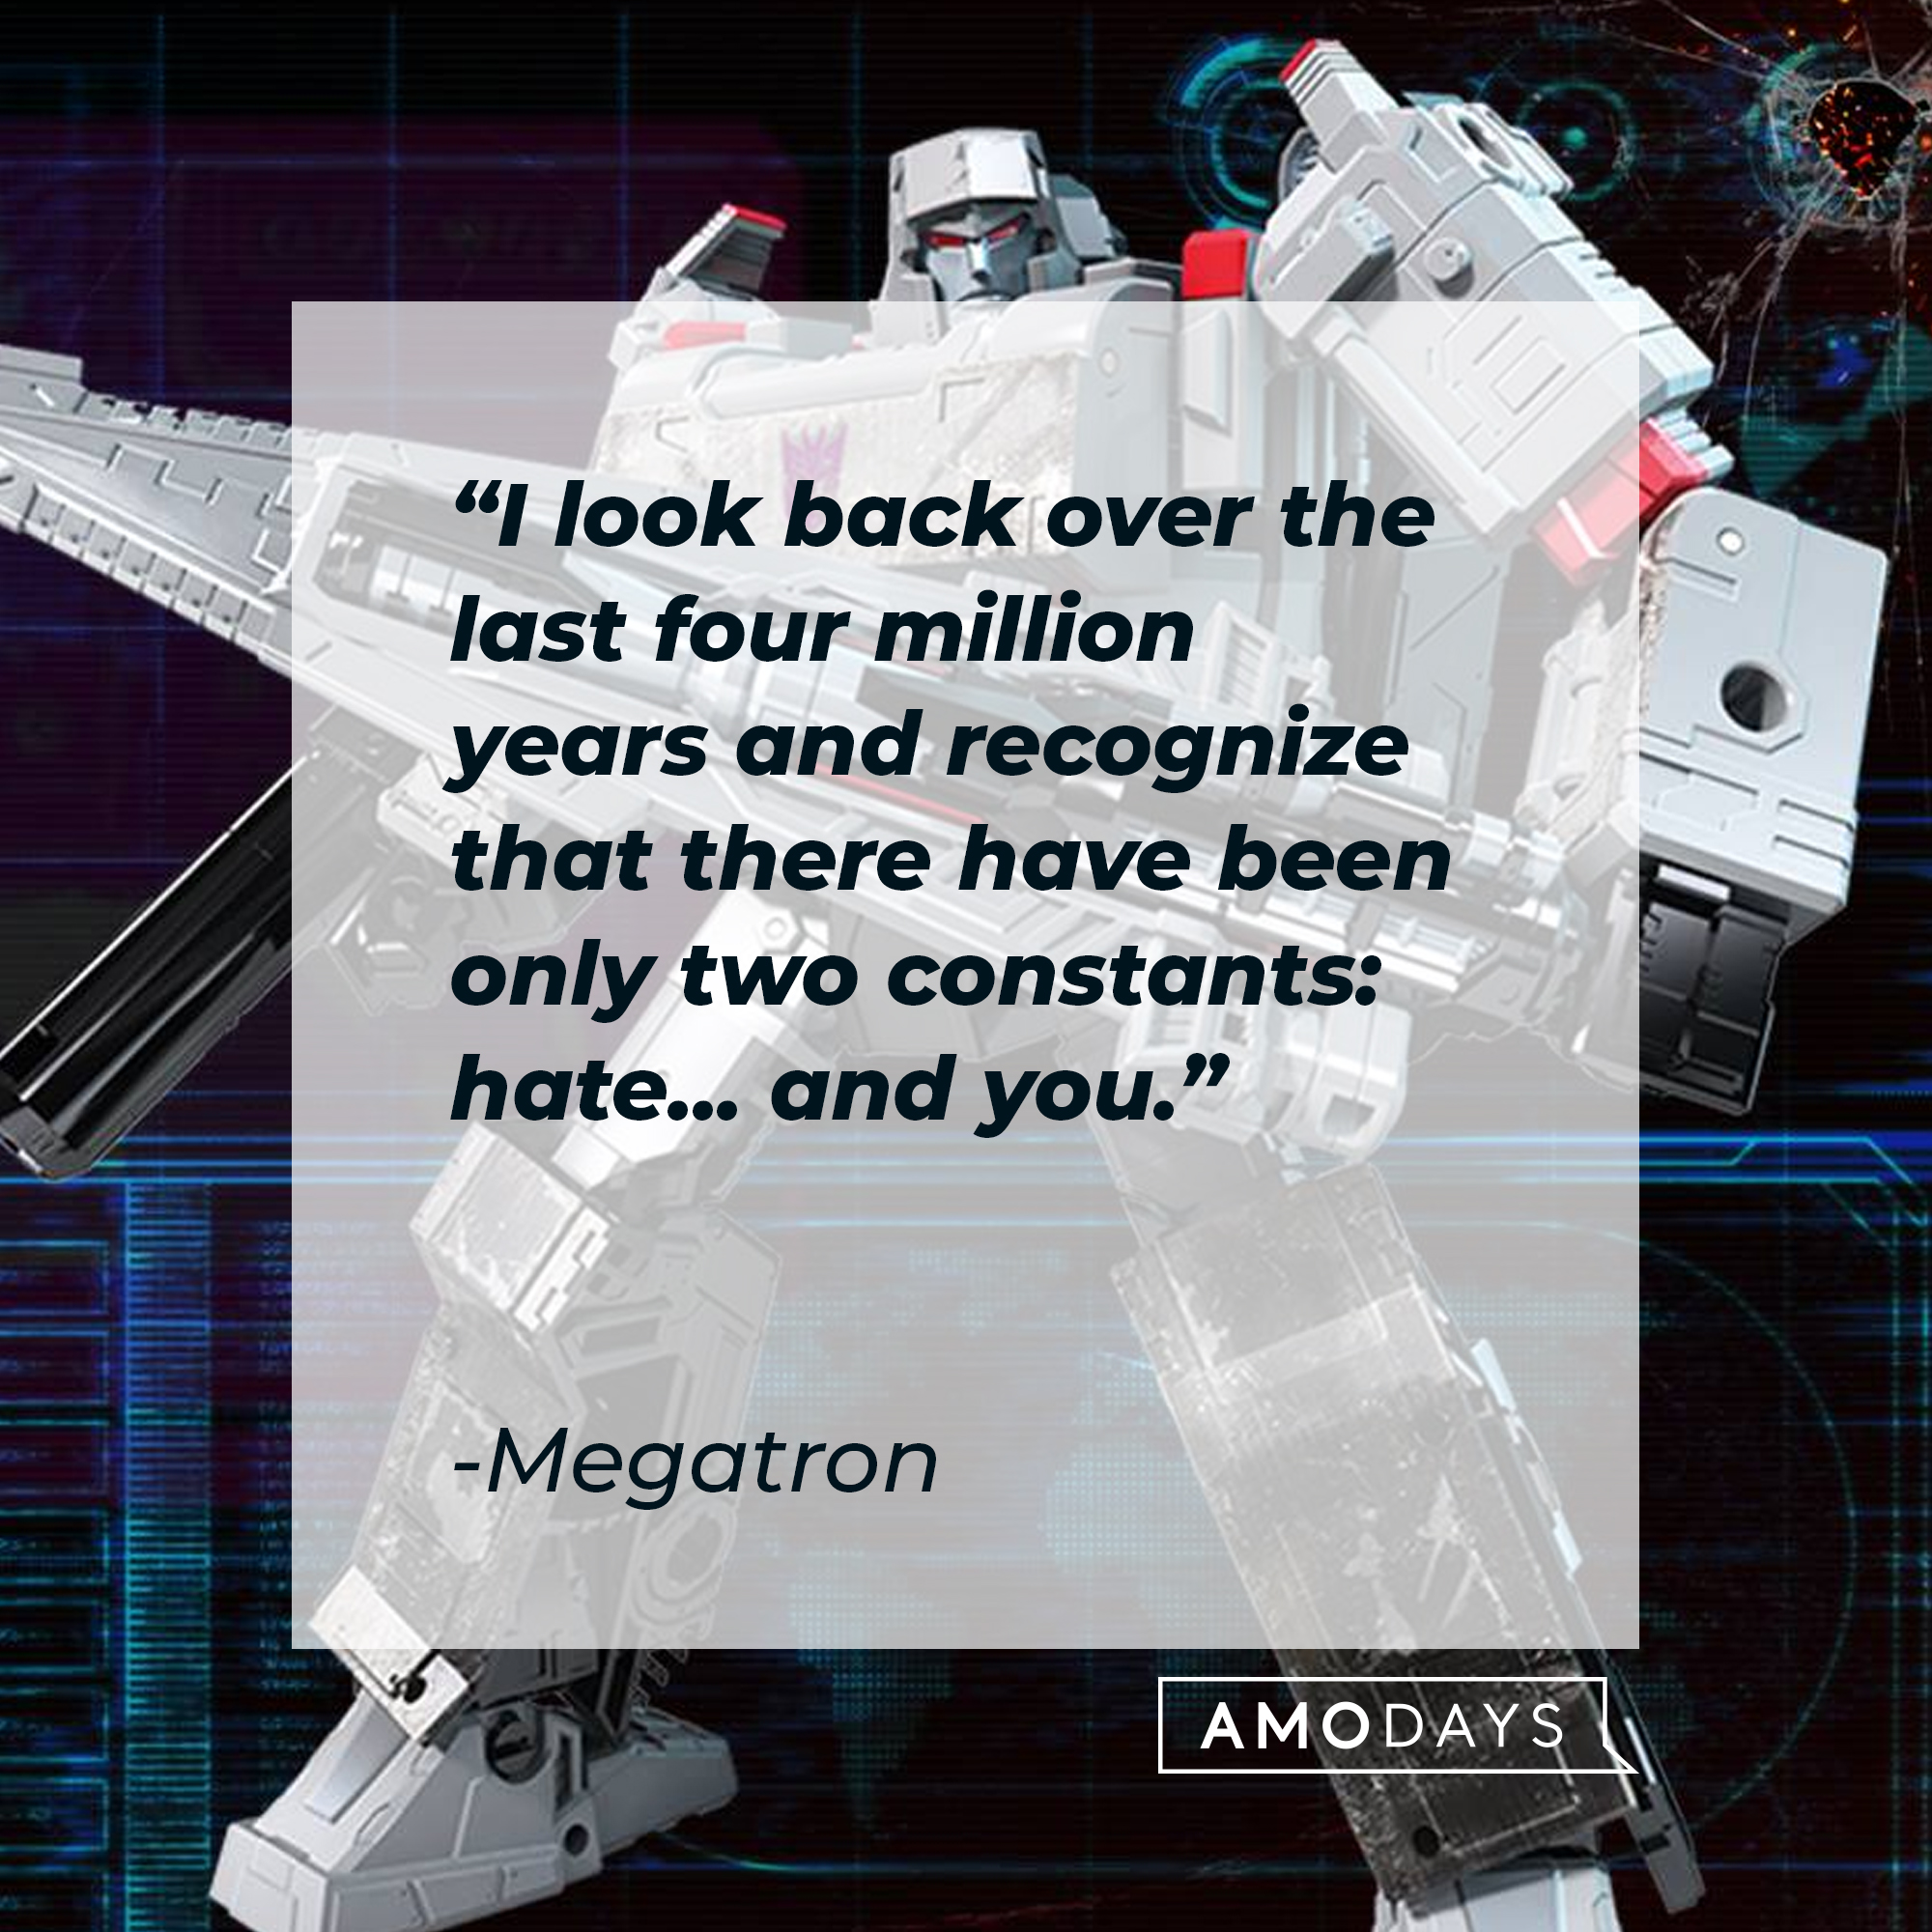 A photo of Megatron with his quote, "I look back over the last four million years and recognize that there have been only two constants: hate... and you." | Source: Facebook/transformers